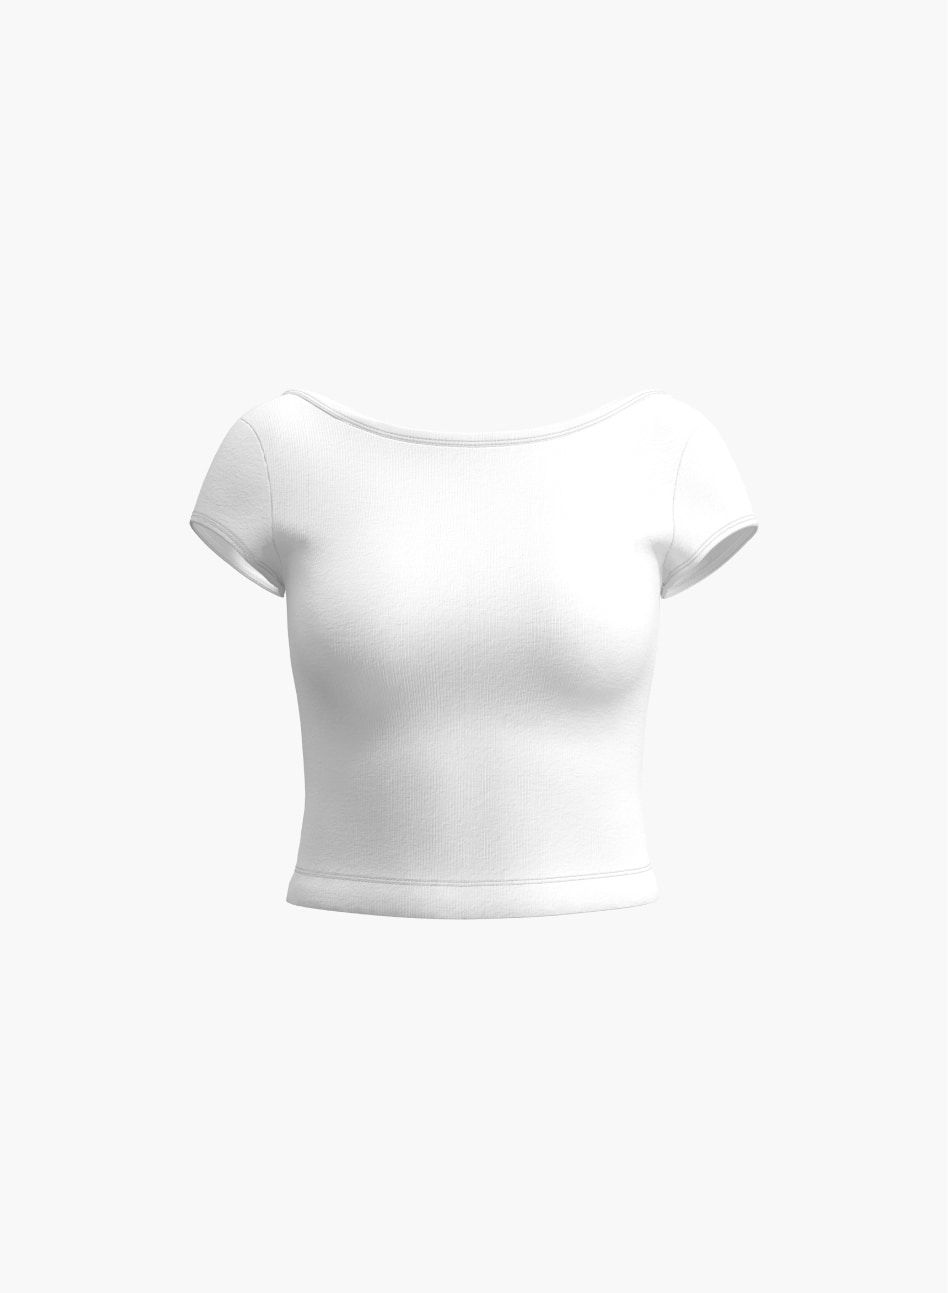 A white t-shirt with a smocked bust.